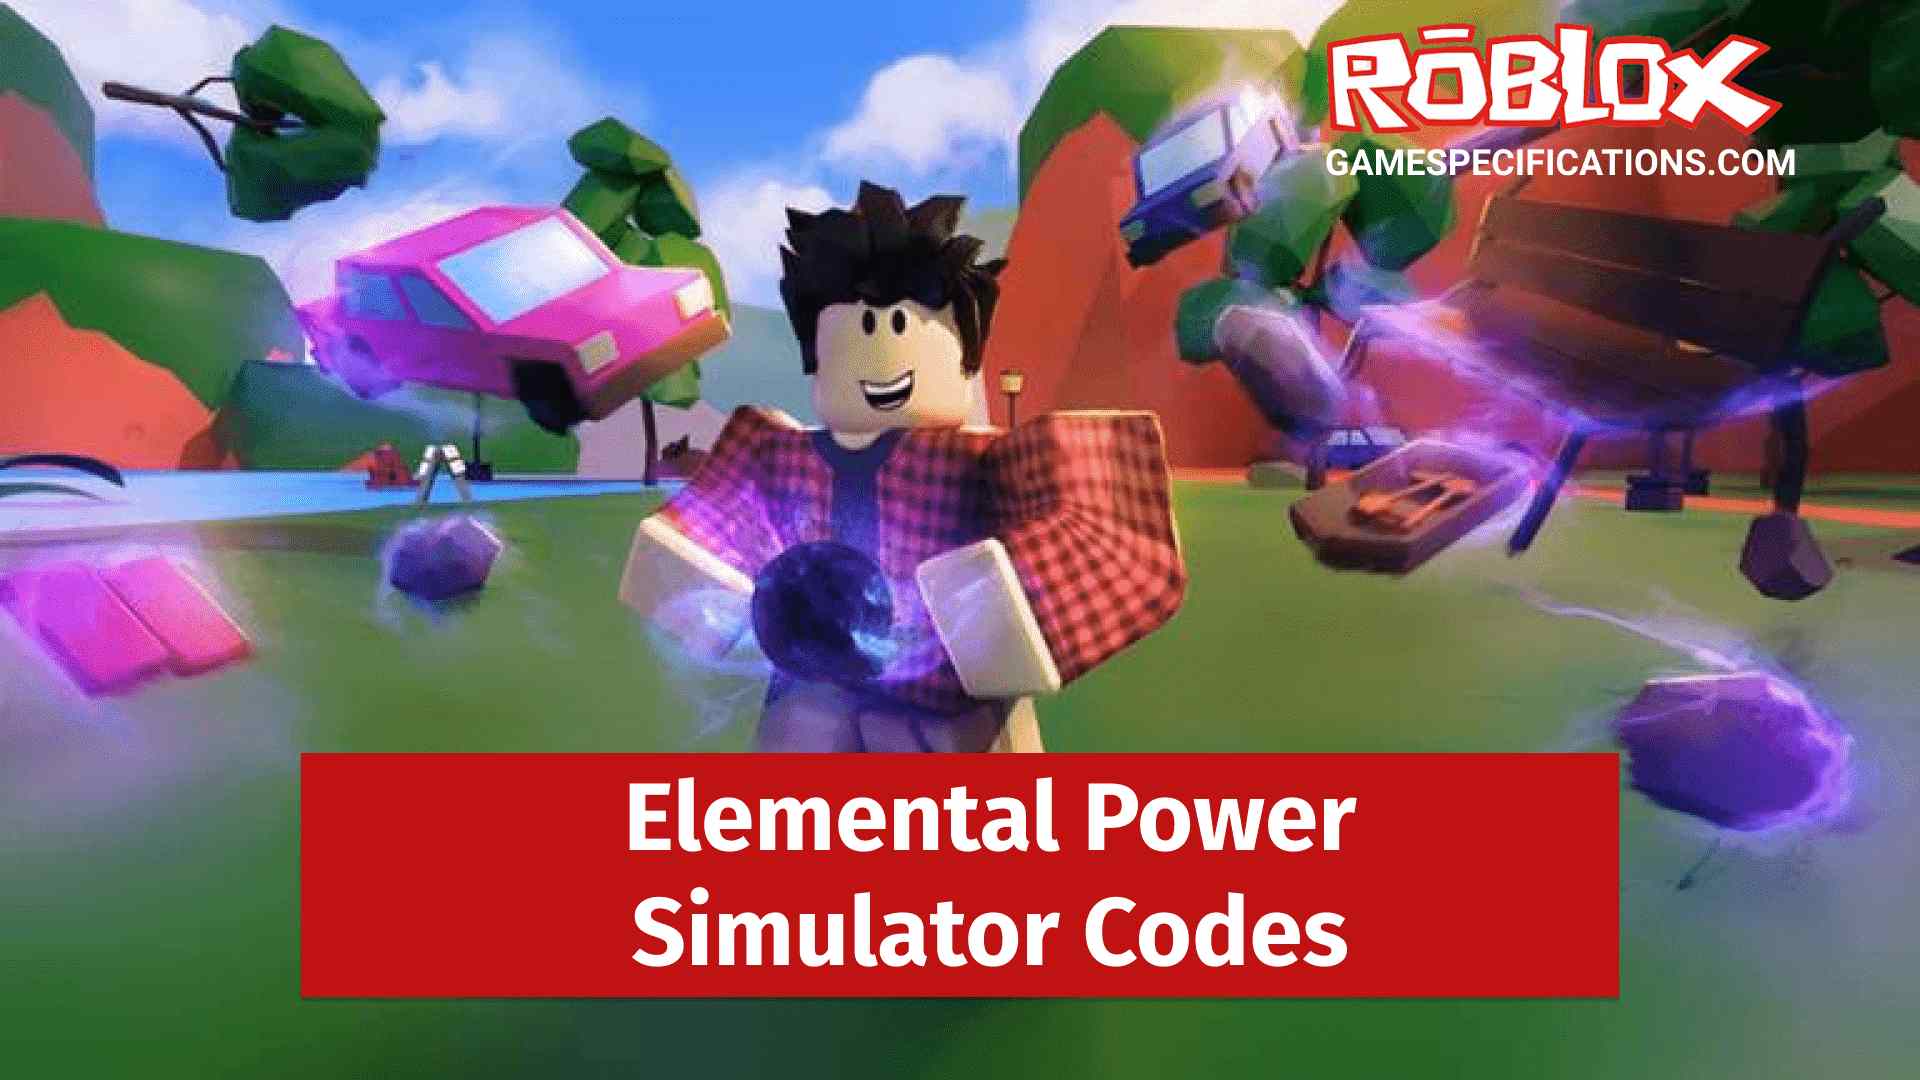 Roblox Elemental Power Simulator Codes July 2021 Game Specifications - roblox muscle legends codes 2021